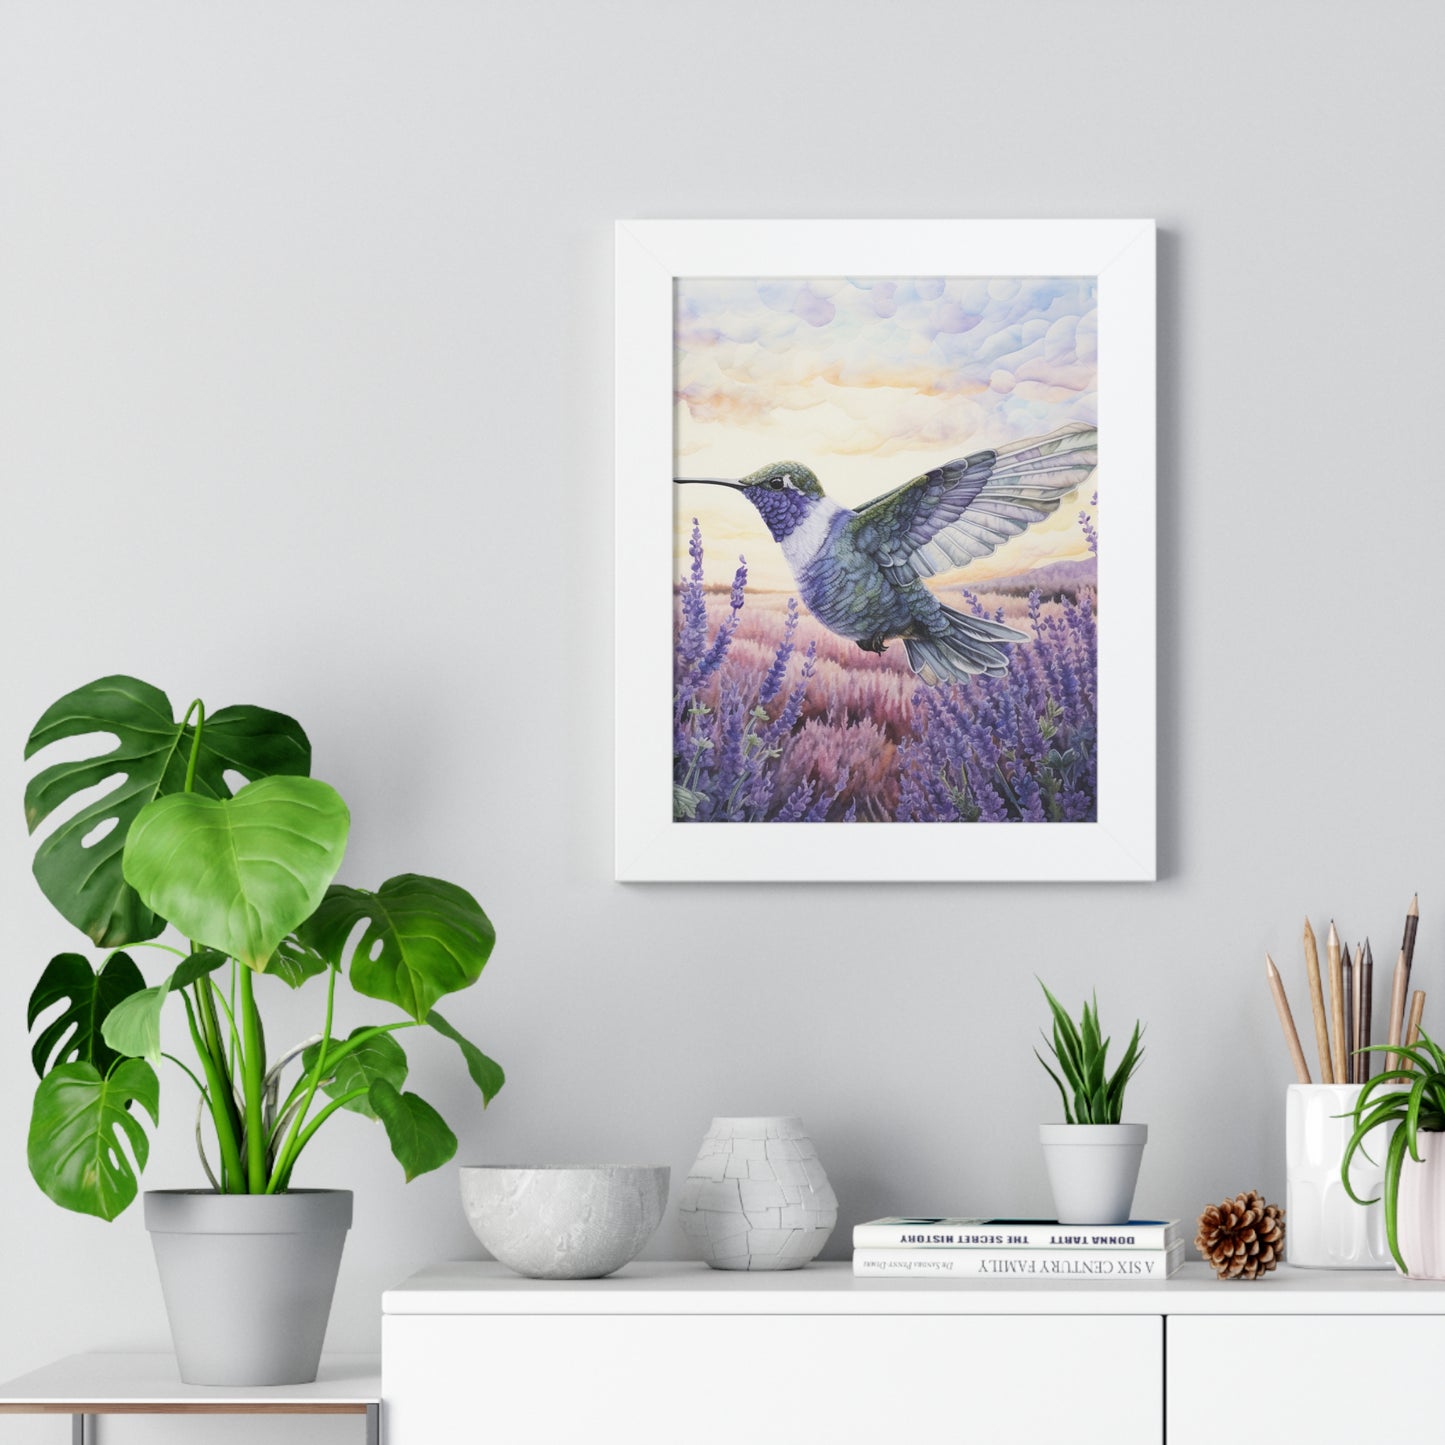 Threaded Wings: A humming's birds dance in a lavender field (Series 2)